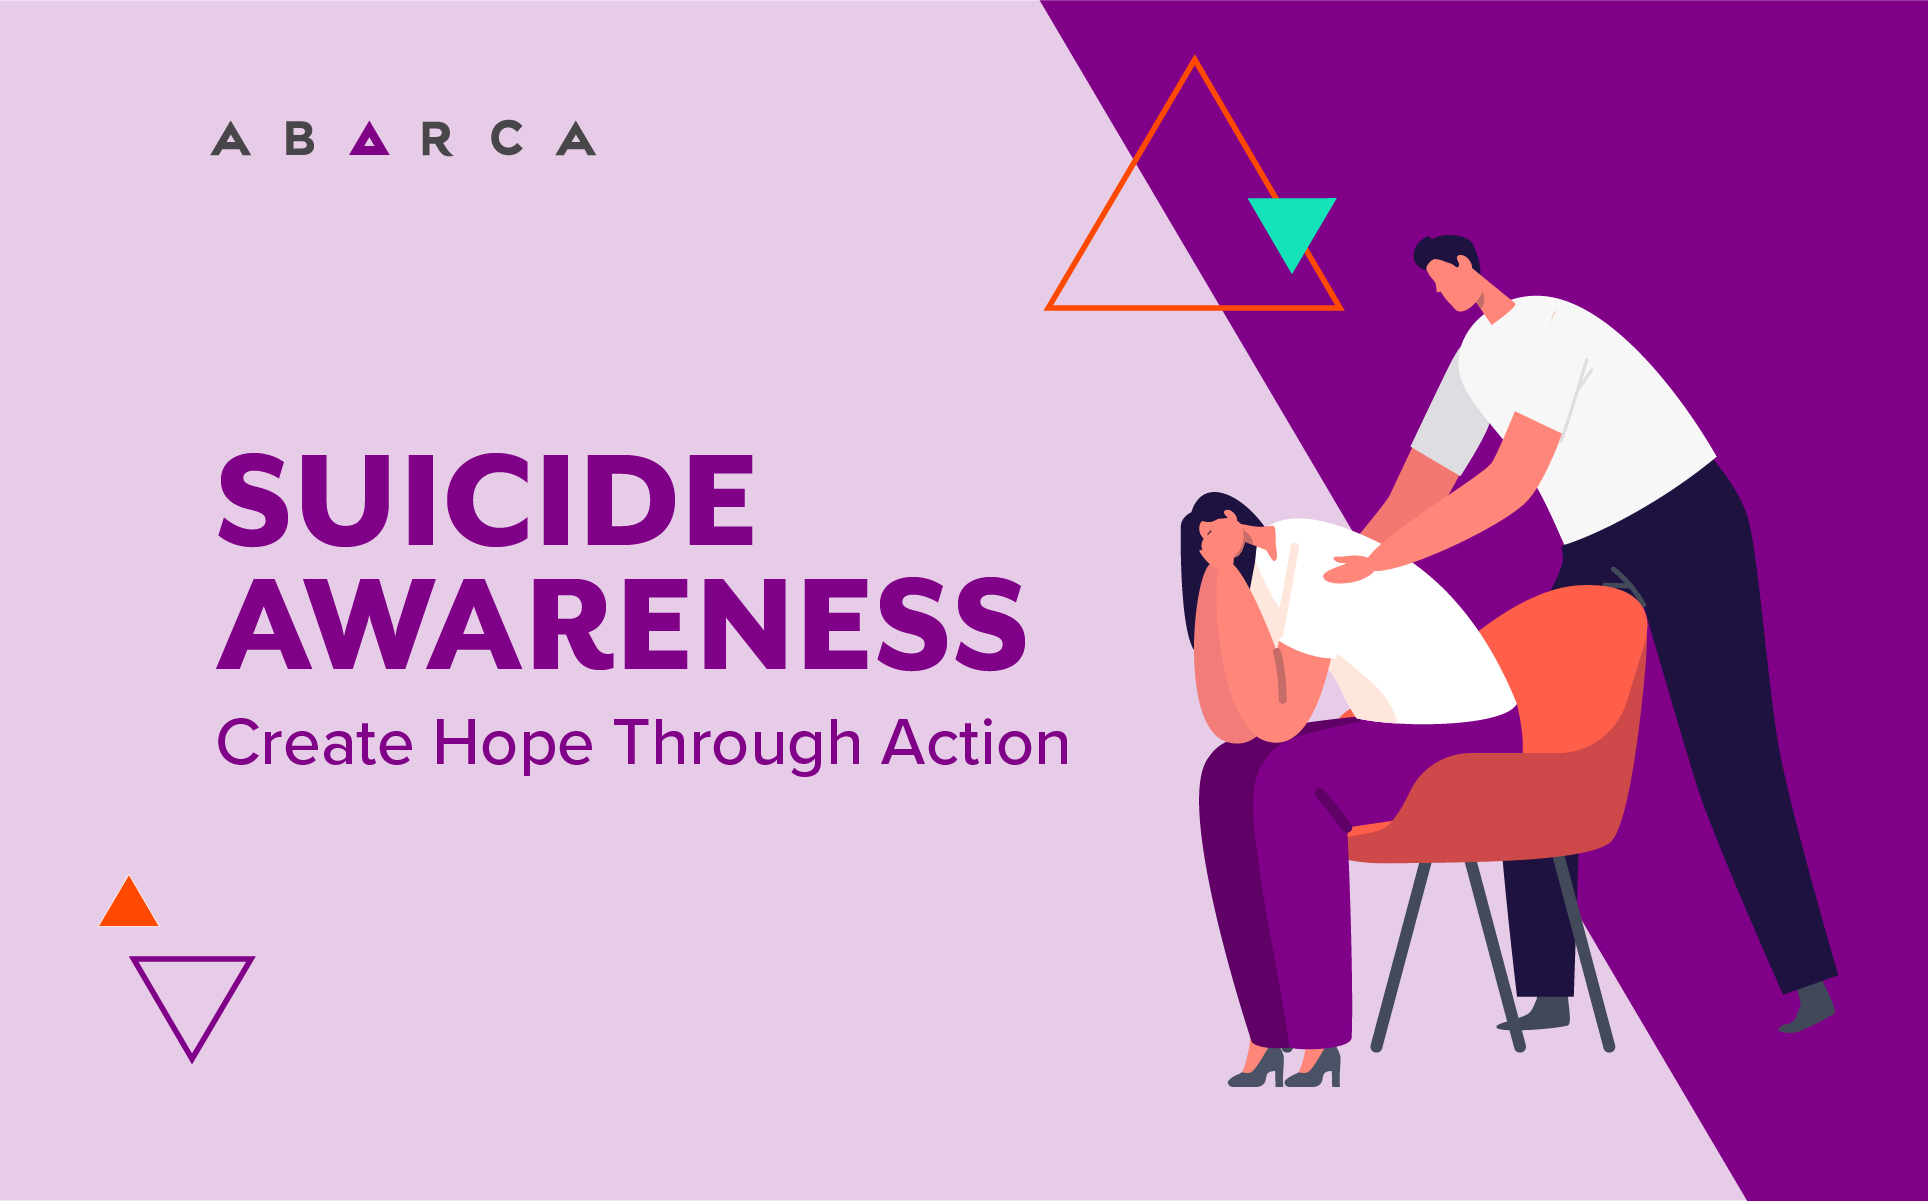 Create hope through action: Abarca goes all in to raise awareness of suicide prevention